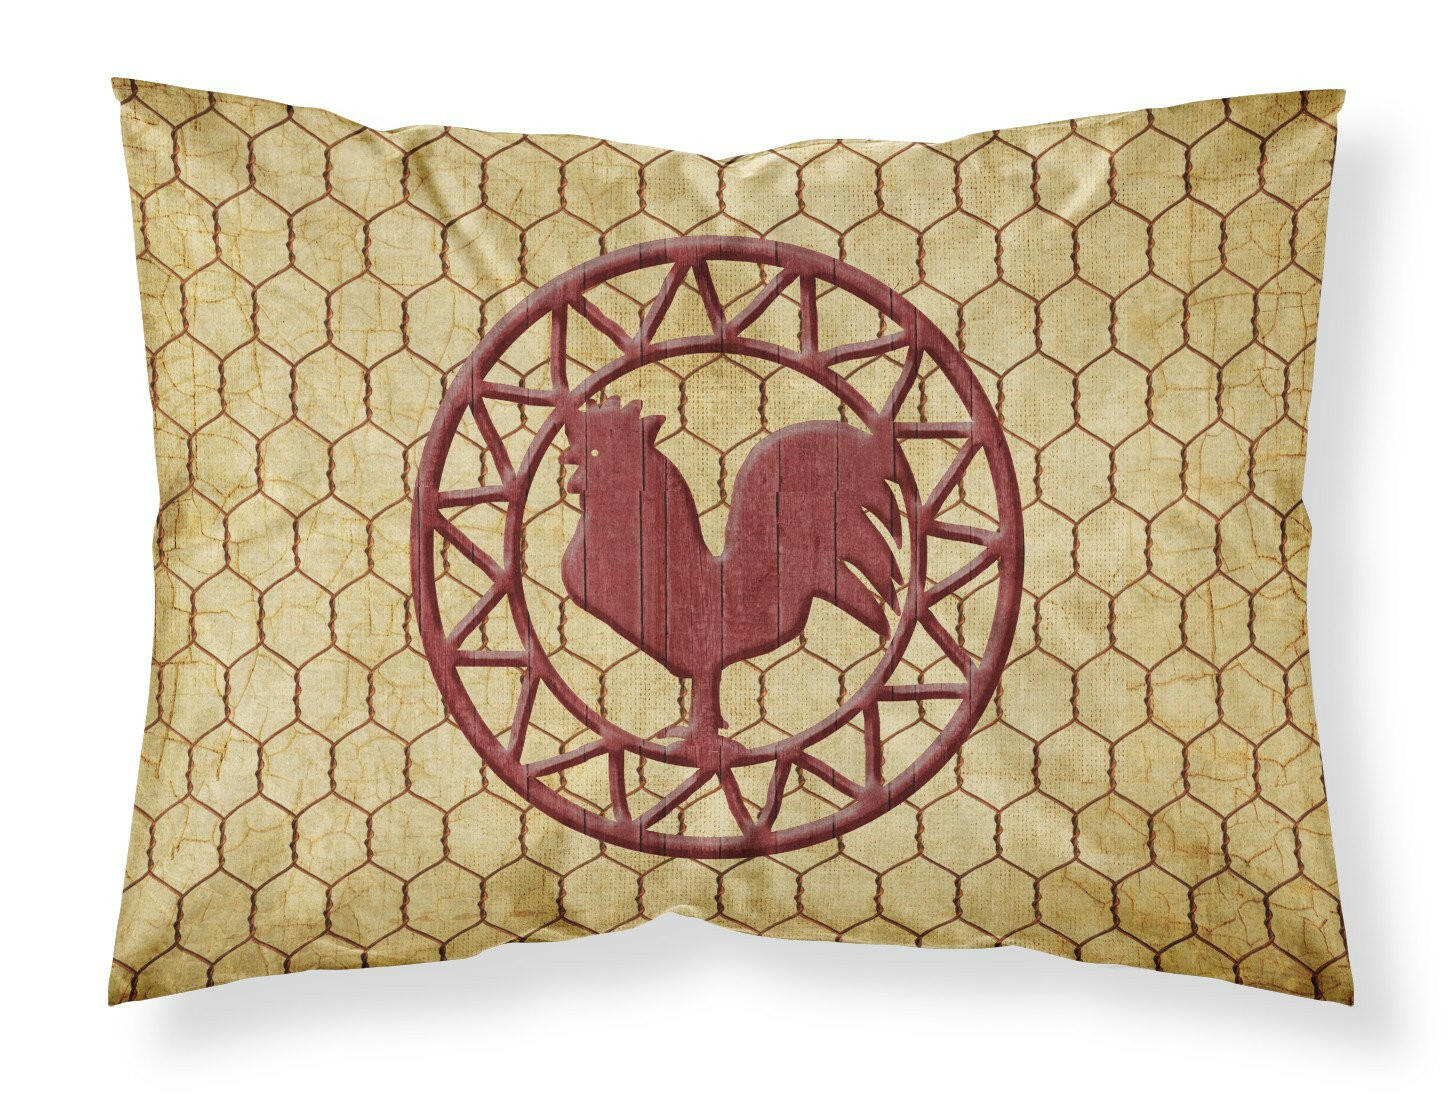 Rooster Chicken Coop Moisture wicking Fabric standard pillowcase SB3085PILLOWCASE by Caroline's Treasures